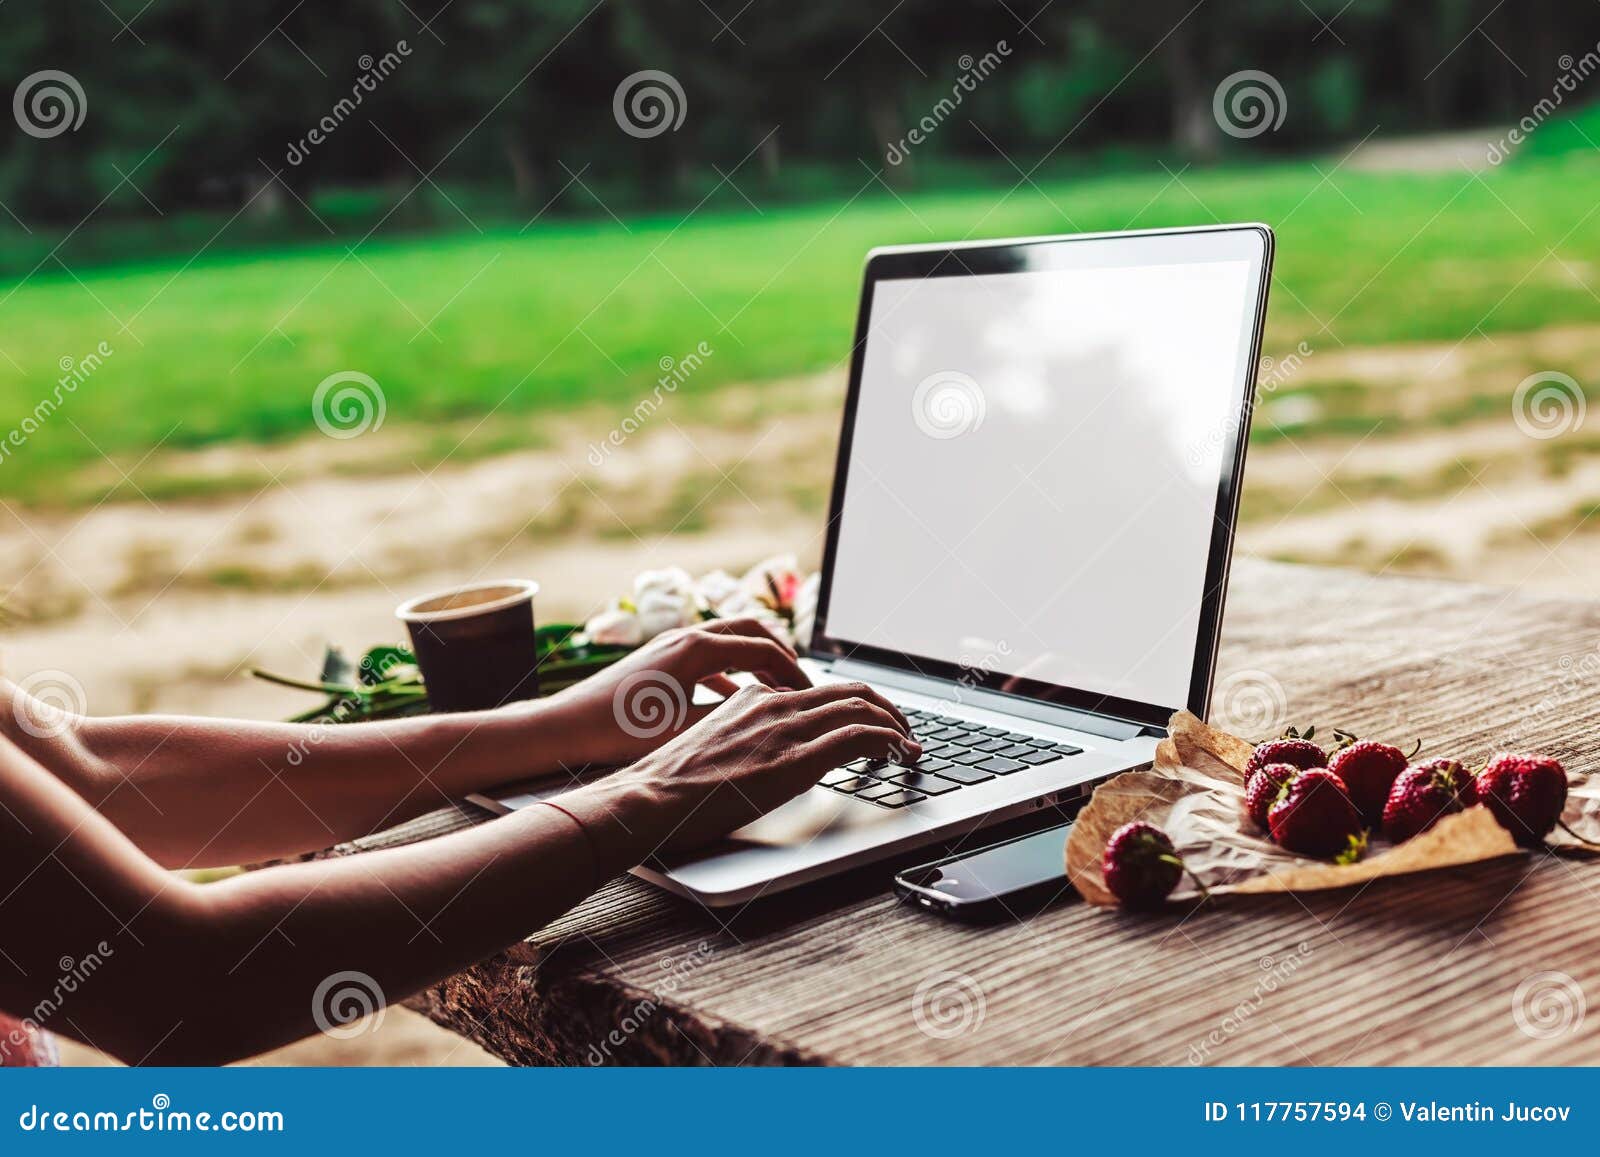 young woman using and typing laptop computer at rough wooden table with coffee cup, strawberries, bouquet of peonies flowers,